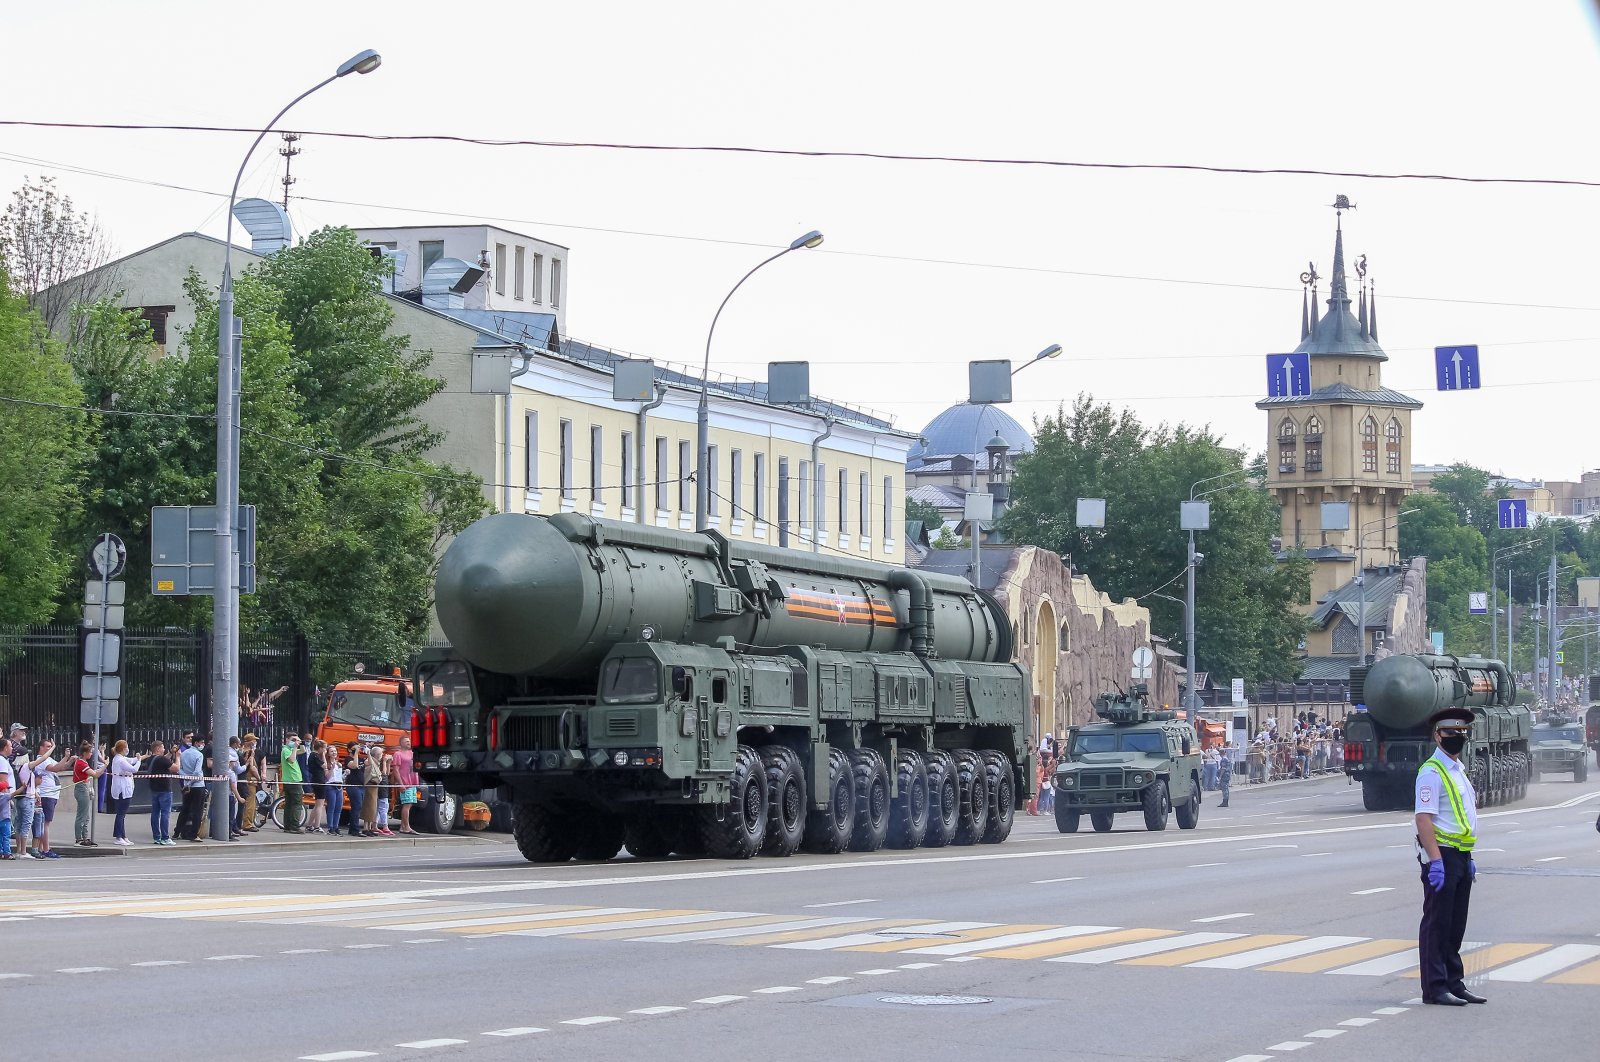 Russia test launches new intercontinental ballistic missile | Daily Sabah